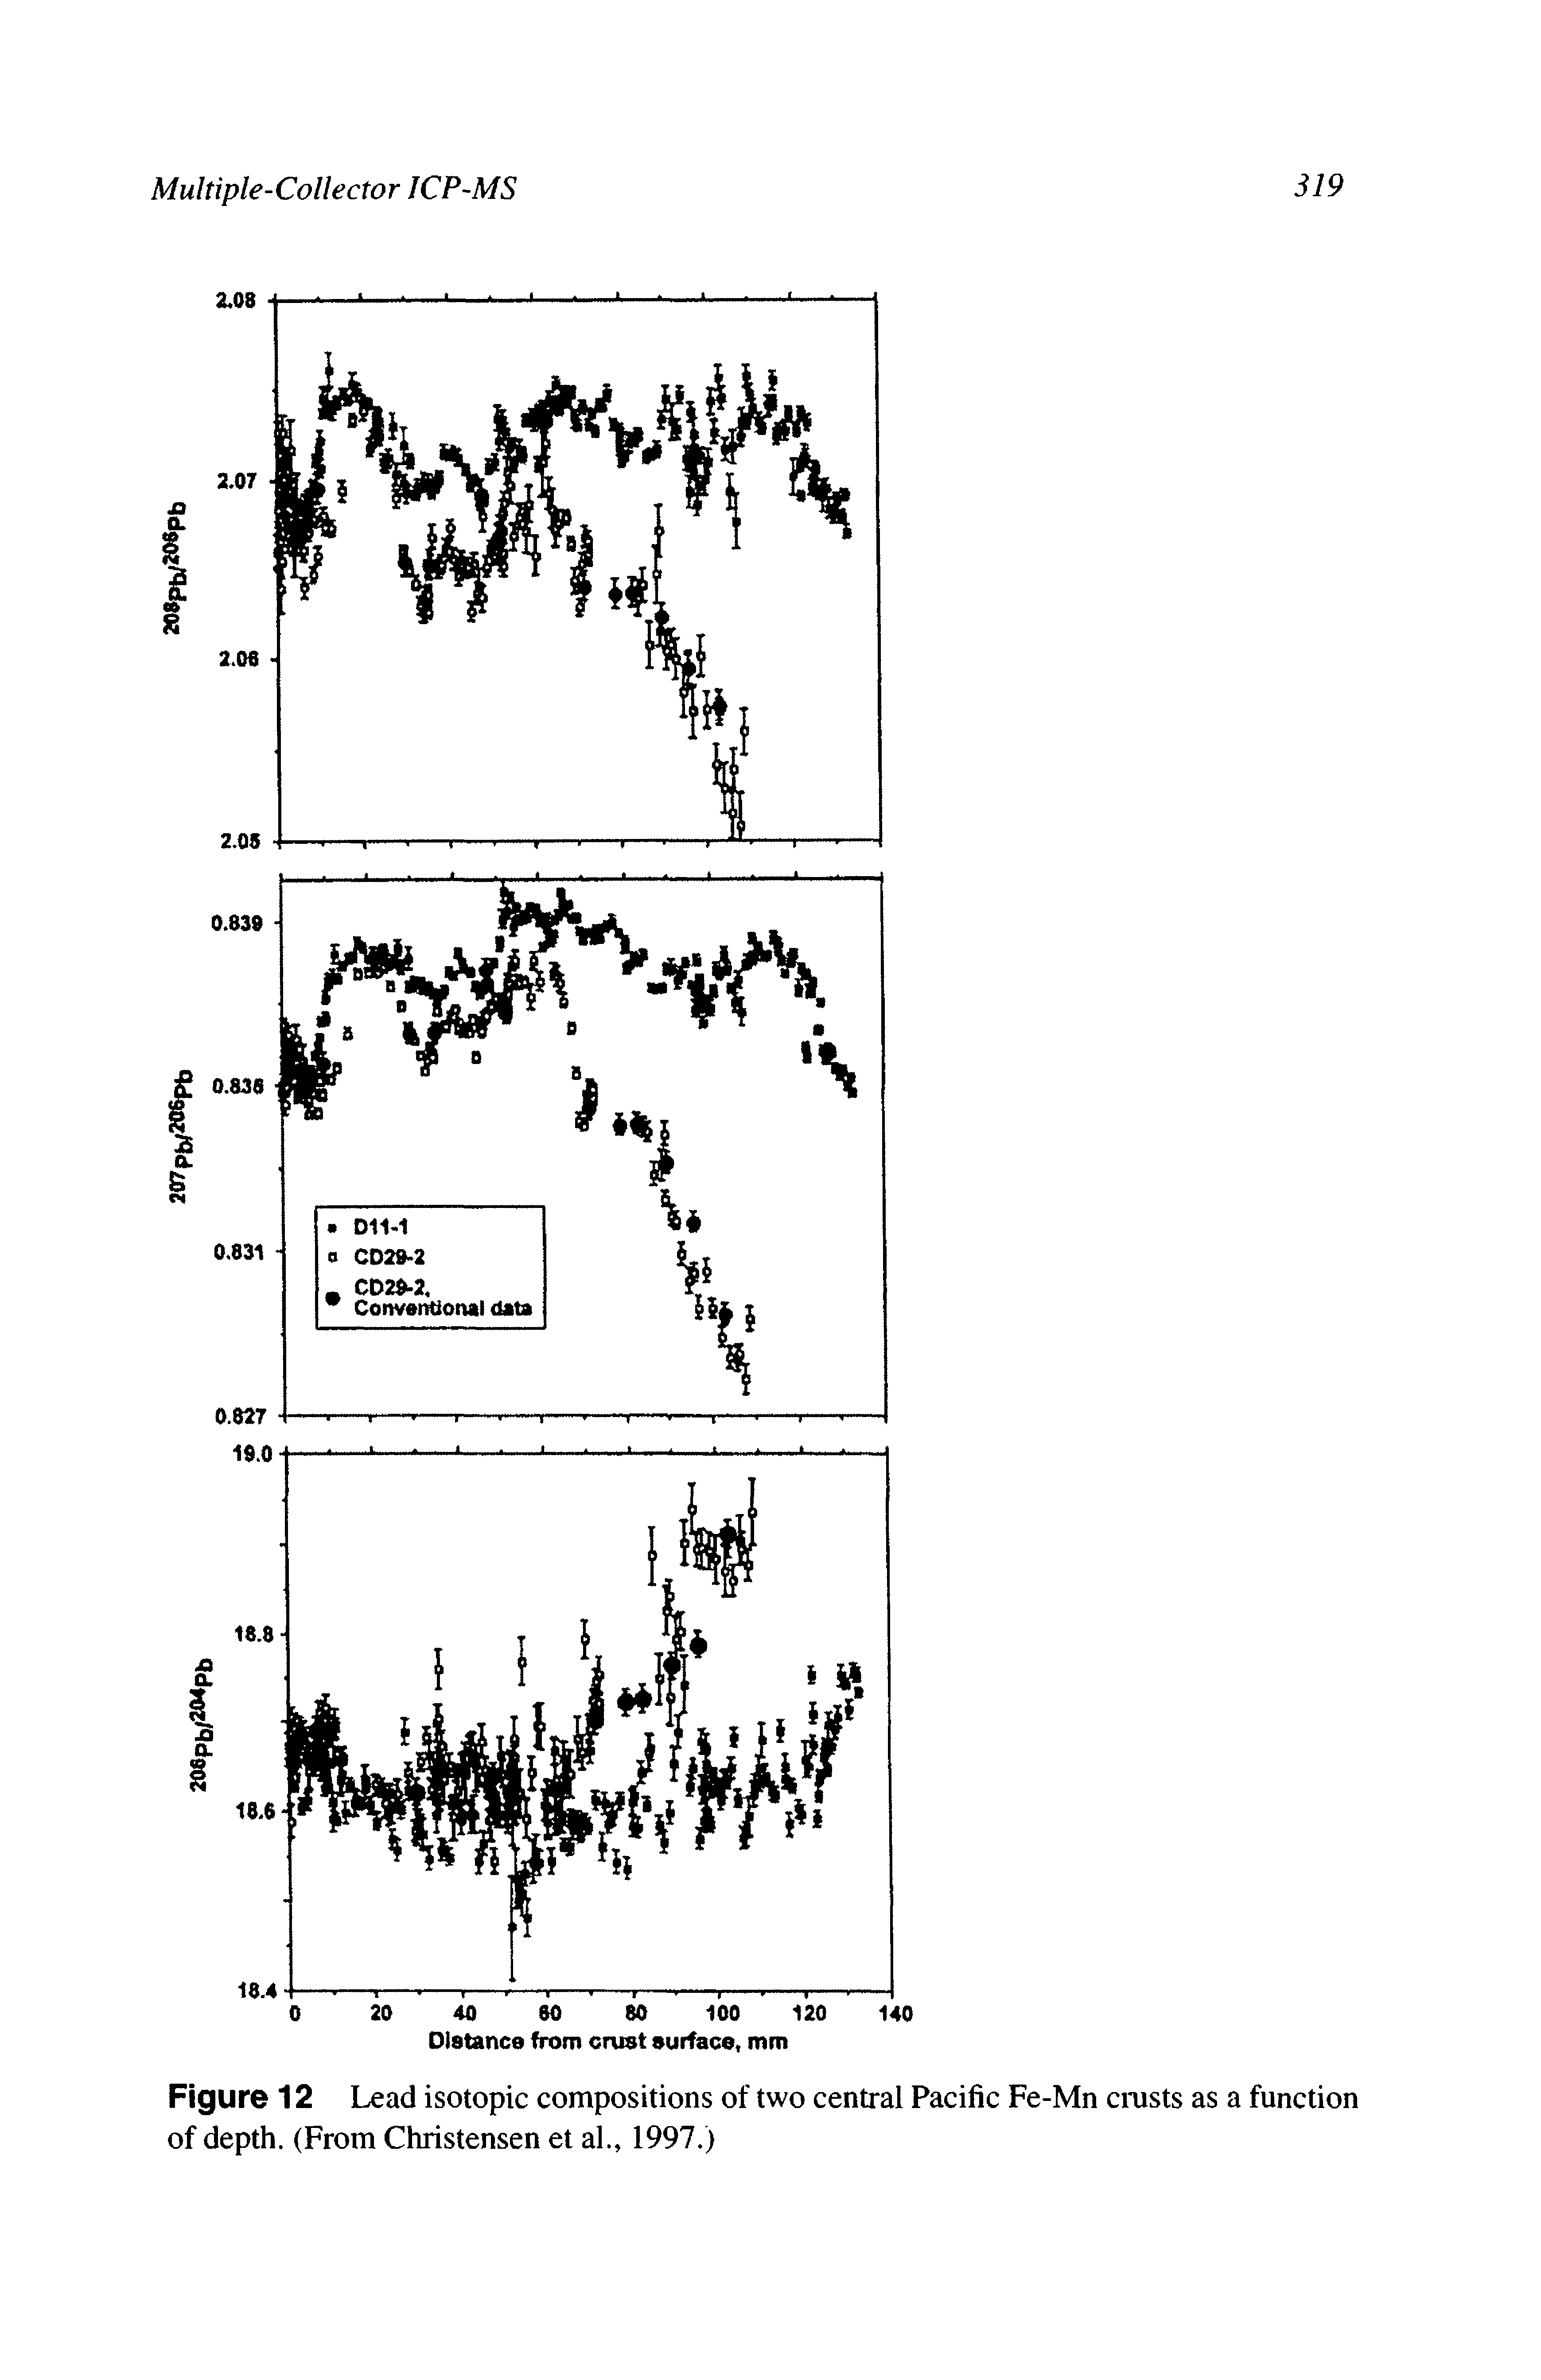 Figure 12 Lead isotopic compositions of two central Pacific Fe-Mn crusts as a function of depth. (From Christensen et al., 1997.)...